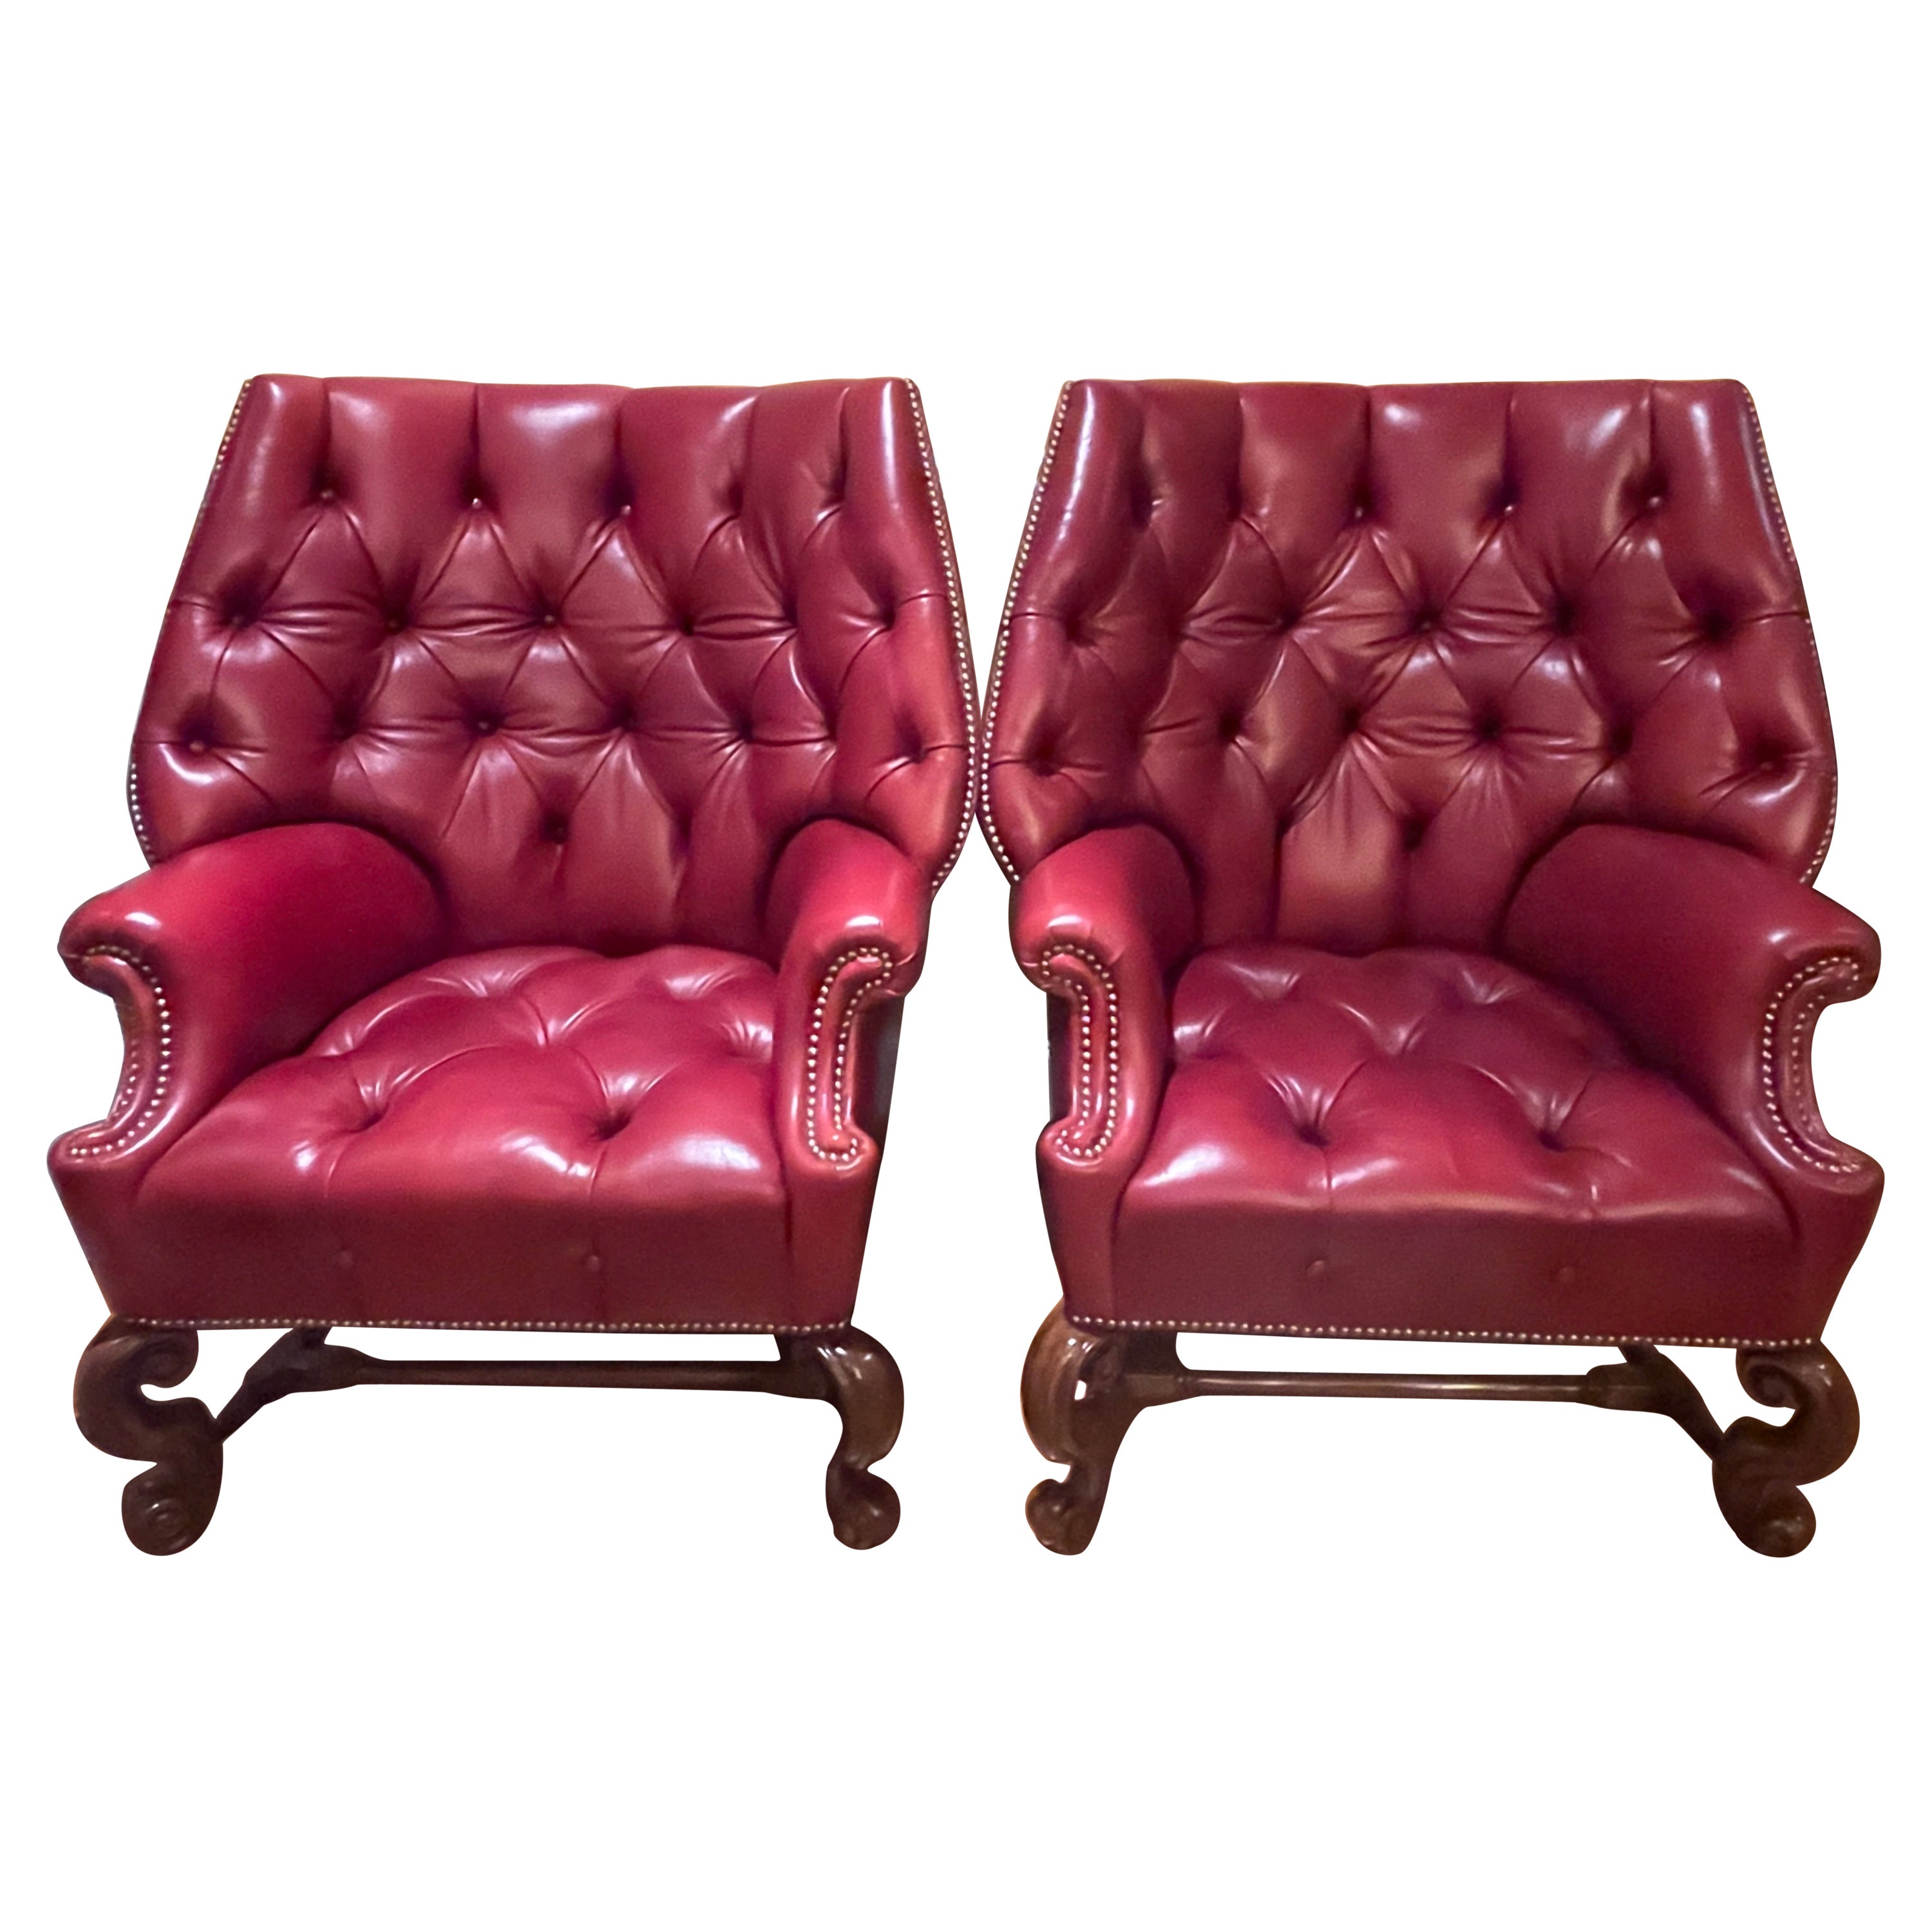 Pair of Oversized Tufted Leather Wingback Chairs, Georgian, Finest Quality For Sale